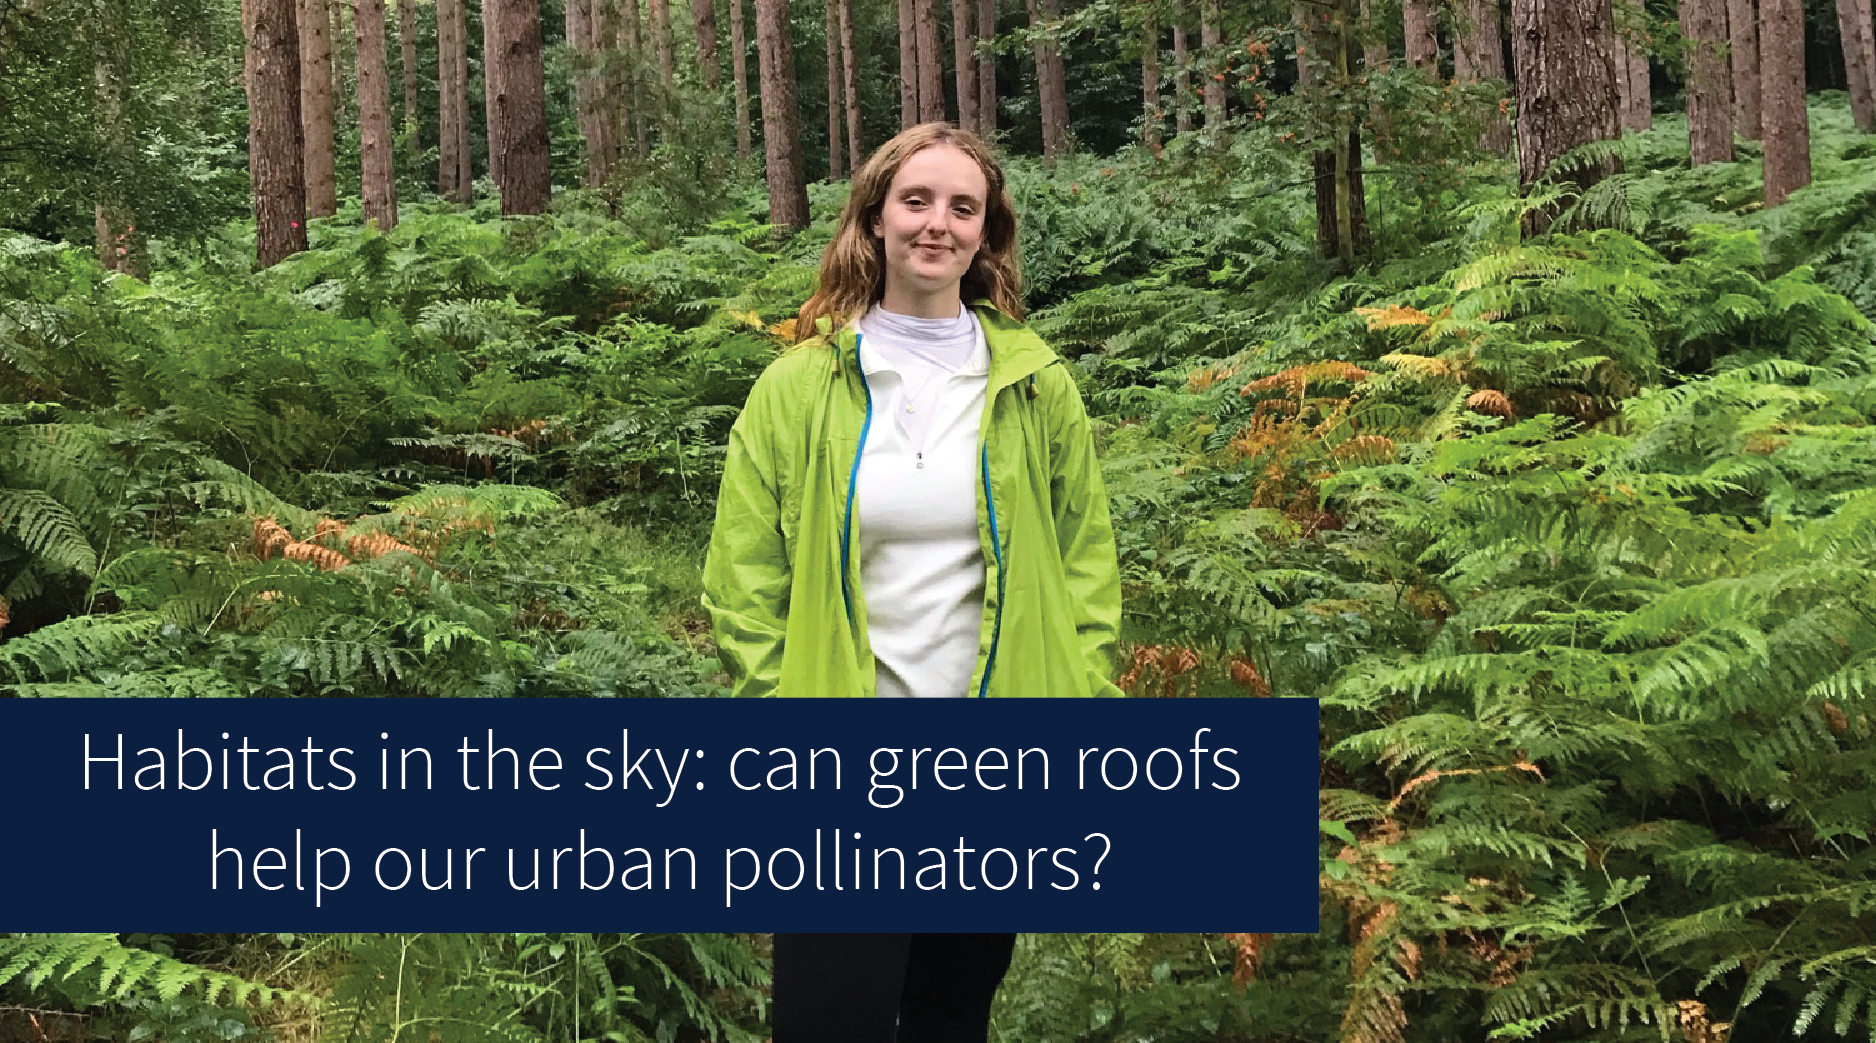 Habitats in the sky: can green roofs help our urban pollinators? - Lydia Miller